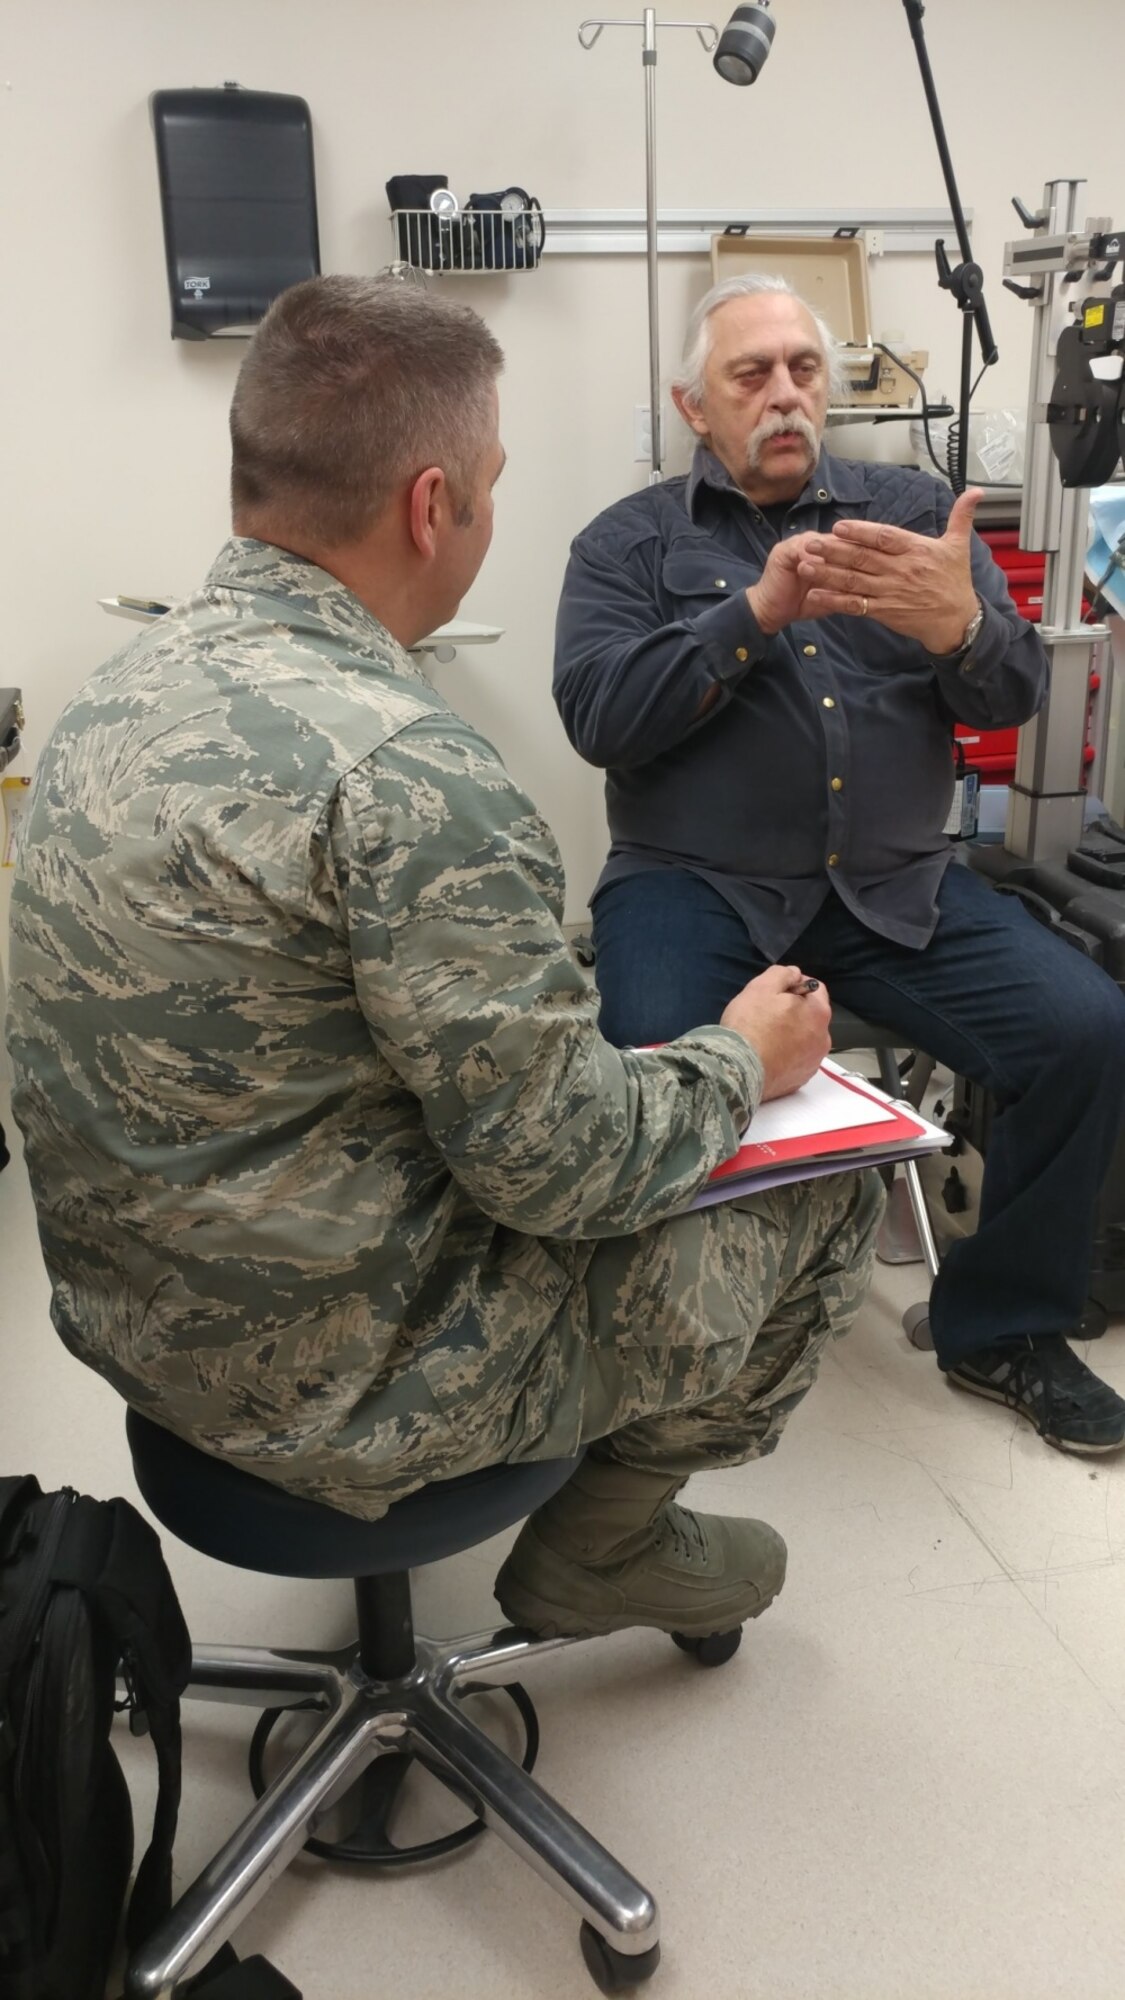 Air Force Major Brett Ringger, 136th Medical Group, Texas Air National Guard, provide eye exams to patients in a portable optometry clinic during ARCTIC CARE 2017, Port Lions, Alaska, on March 29, 2017. ARCTIC CARE 2017 is part of the Innovative Readiness Training program, which is an Office of Secretary of Defense sponsored civil-military collaboration intended to build on mutually beneficial partnerships between U.S. communities and the Department of Defense. ARCTIC CARE 2017 provides training opportunities for U.S. military (Active, Guard, Reserve) and Canadian Health service members to prepare for worldwide deployment while supporting the needs of underserved communities on Kodiak Island, Alaska. (U.S. Air Force photo by Tech. Sgt. Wendy Day) 